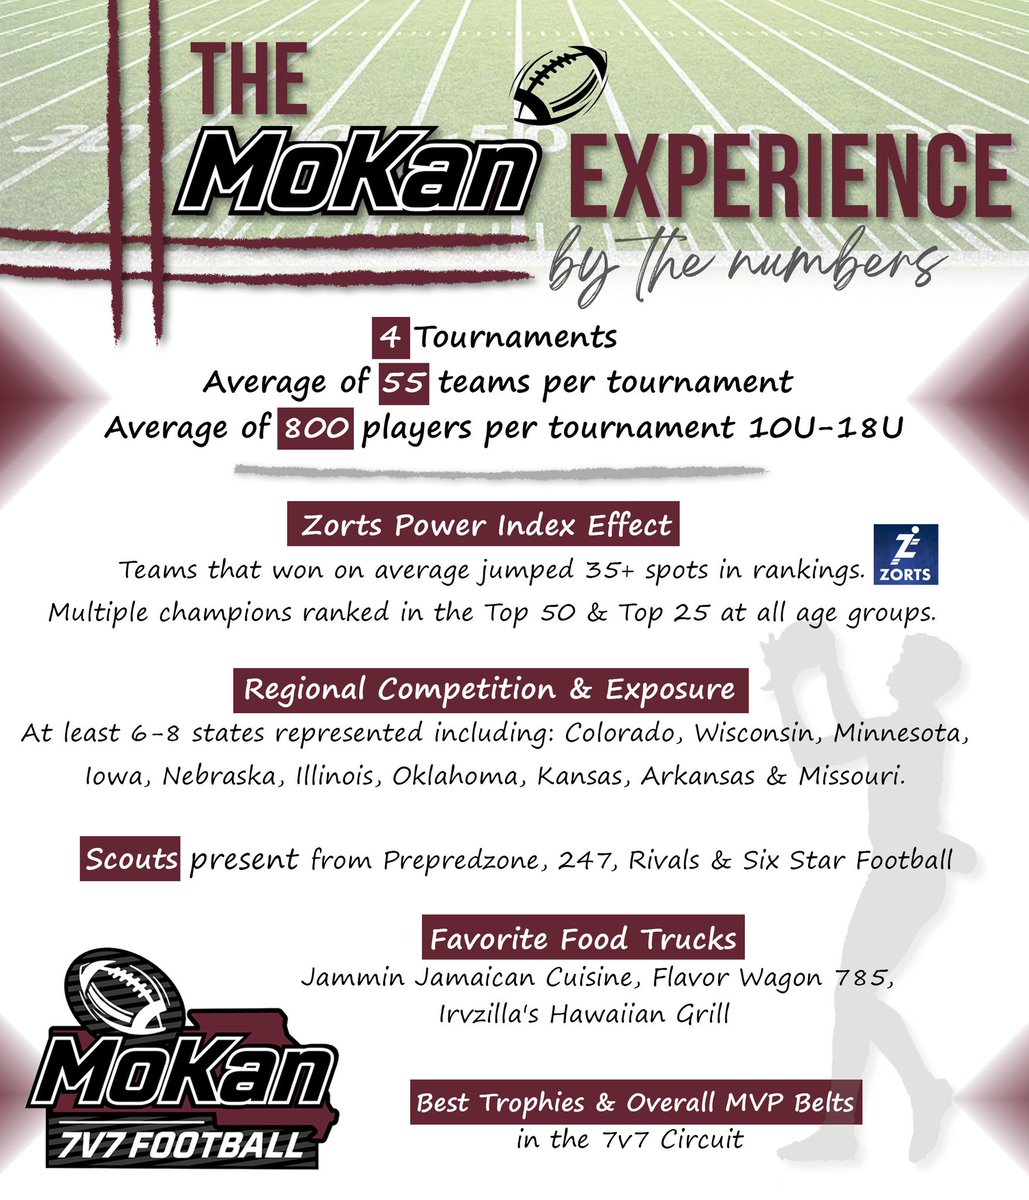 What a year it has been! Thank you to all the clubs/teams/families who attended a MoKan Event. We are excited to keep building & growing for many more years to come. Already close to having the 2025 schedule finalized 👀